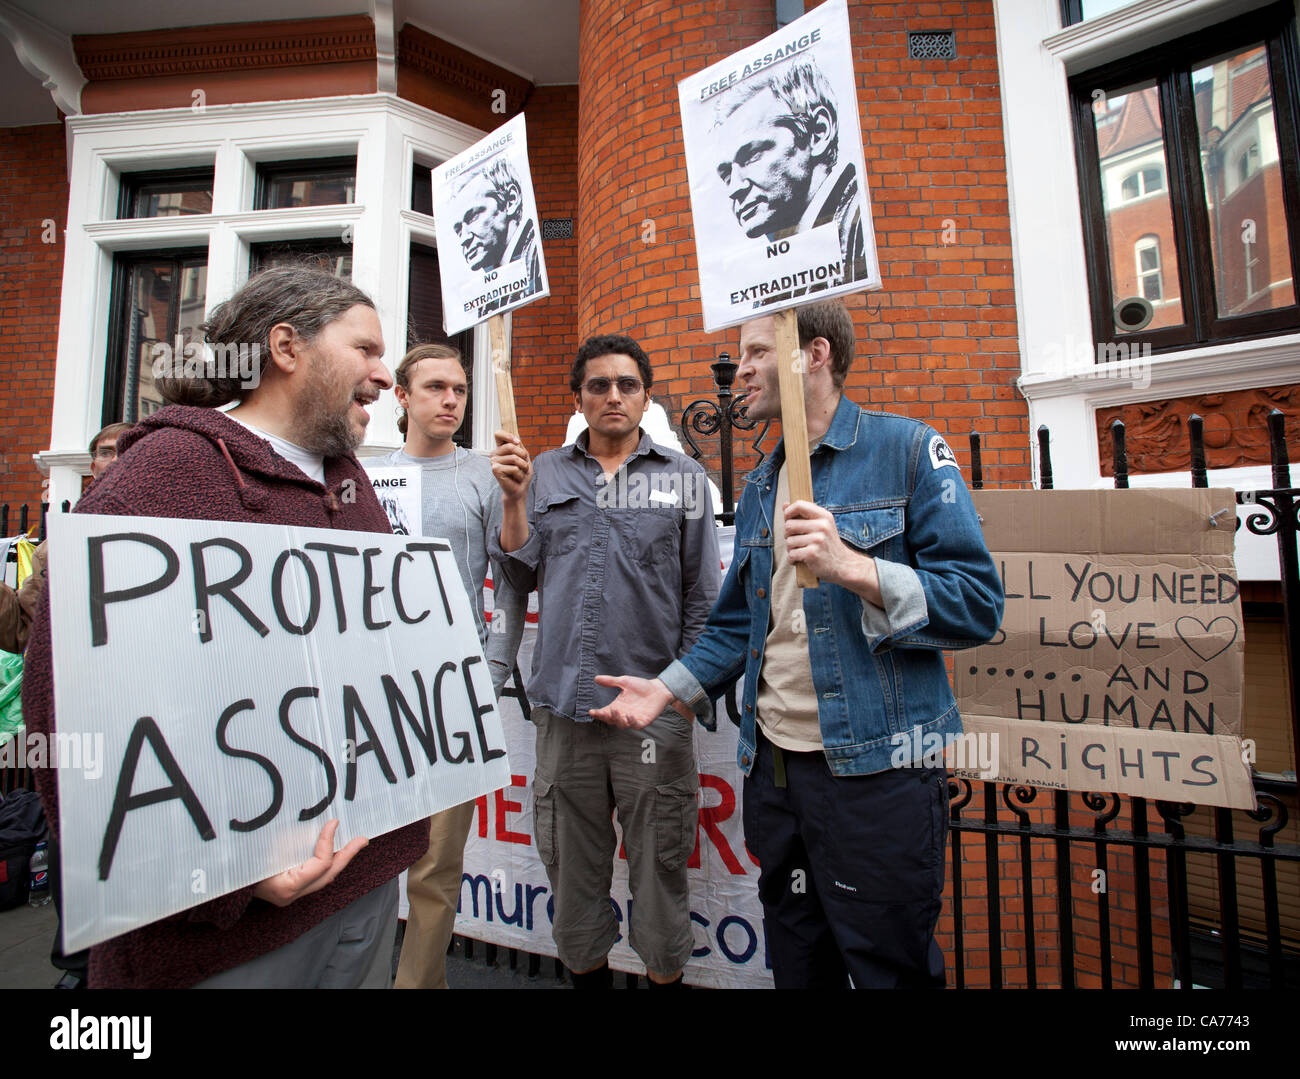 London, UK. 20th June, 2012. Protestors holding up placards outside the Ecuadorian Embassy whilst the Wikileaks founder Julian Assange seeks asylum inside the Embassy. Stock Photo